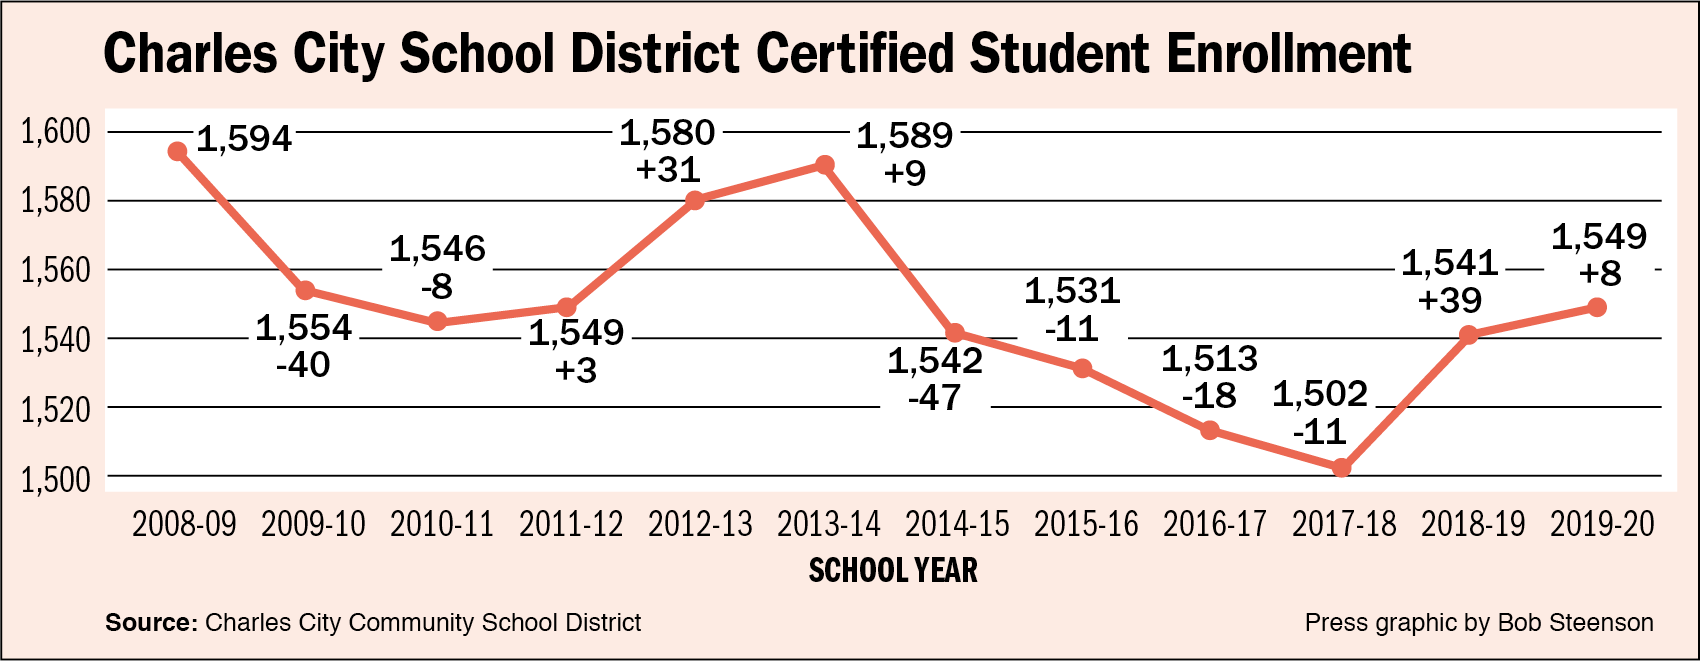 Higher enrollment trend a boon to school district, community